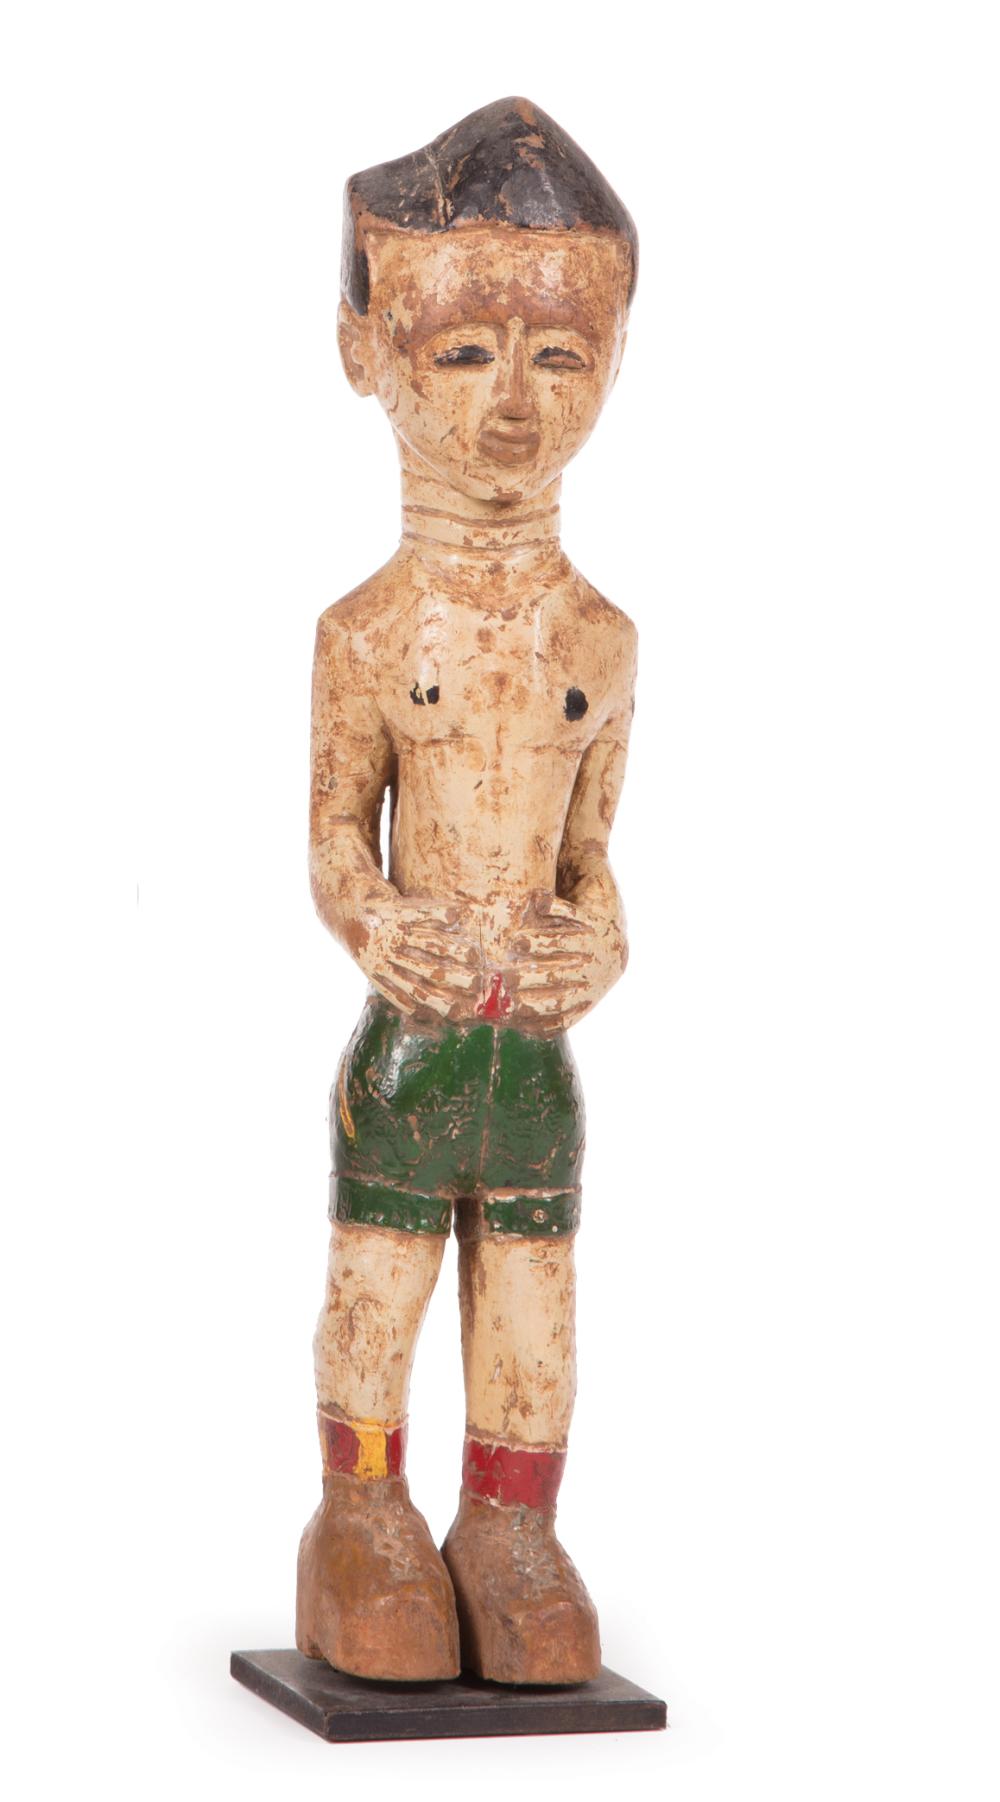 AFRICAN CARVED AND PAINTED WOOD FIGUREAfrican